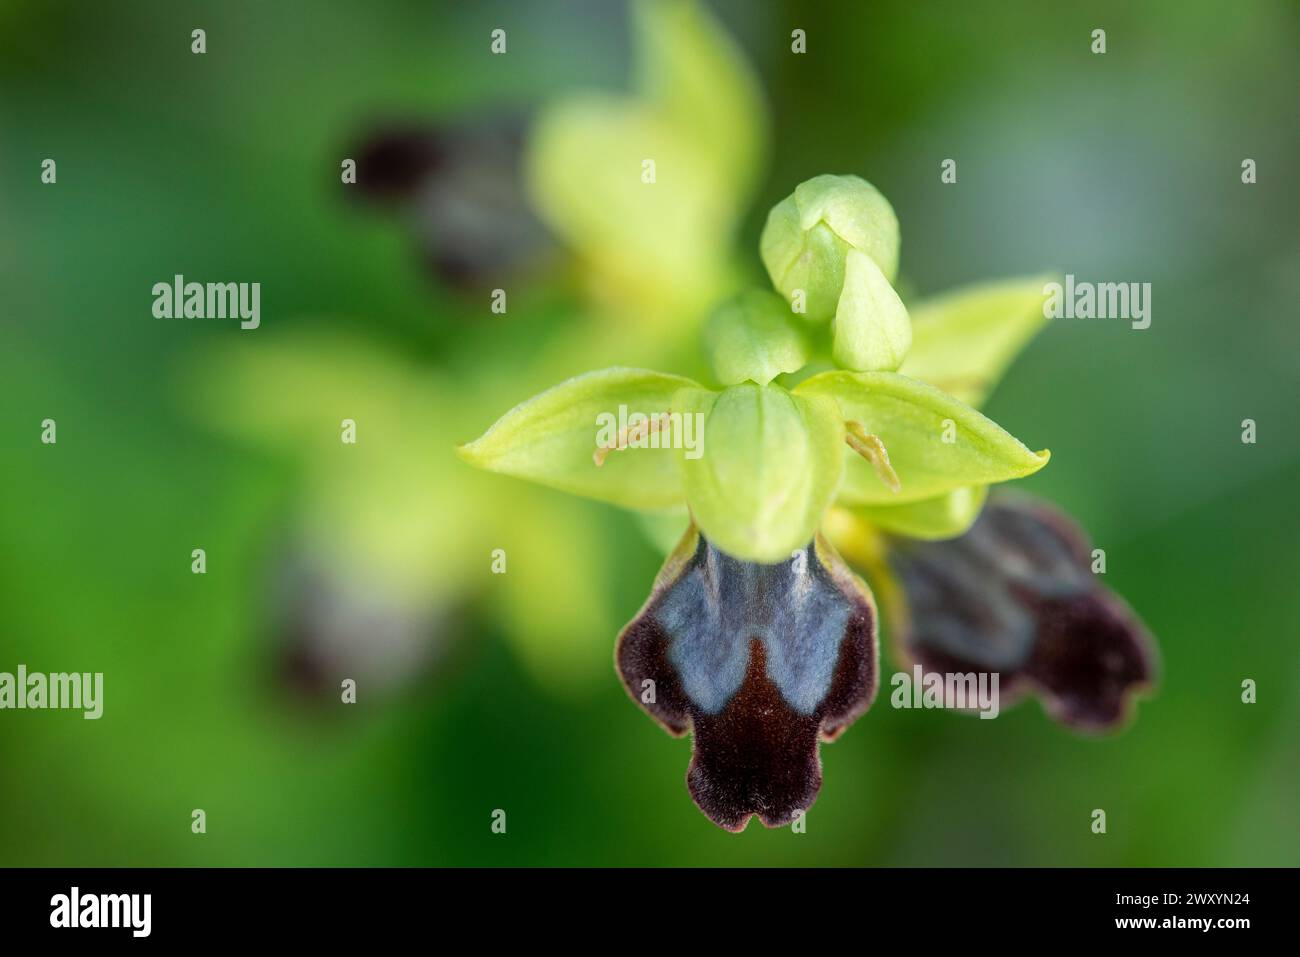 A close-up shot of Ophrys lupercalis, rare wild orchid species in its natural habitat displaying its unique black and yellow flowers against a soft gr Stock Photo